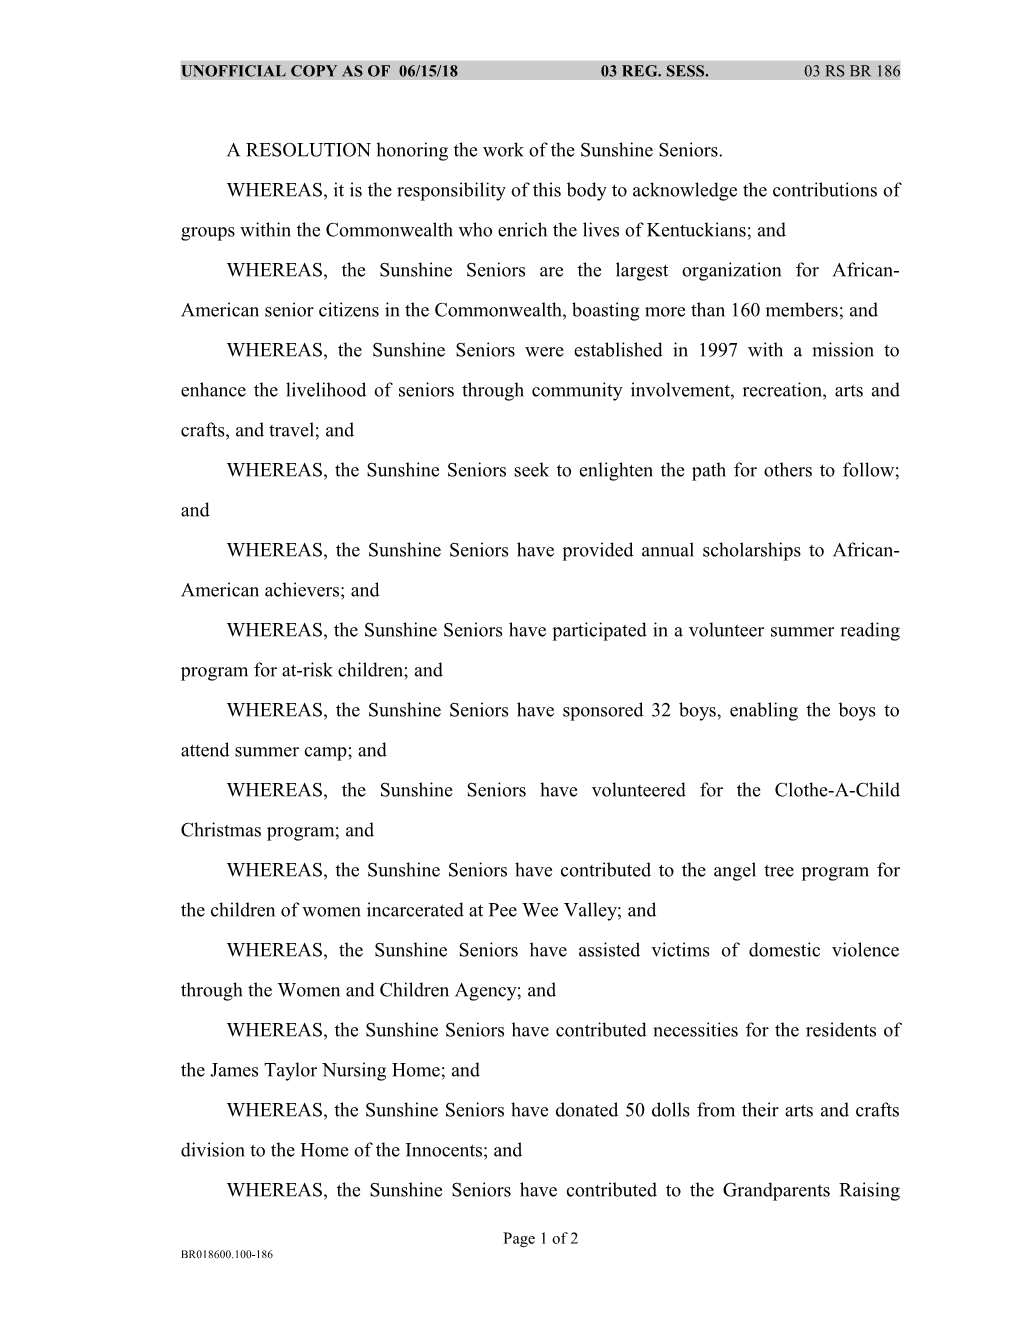 A RESOLUTION Honoring the Work of the Sunshine Seniors